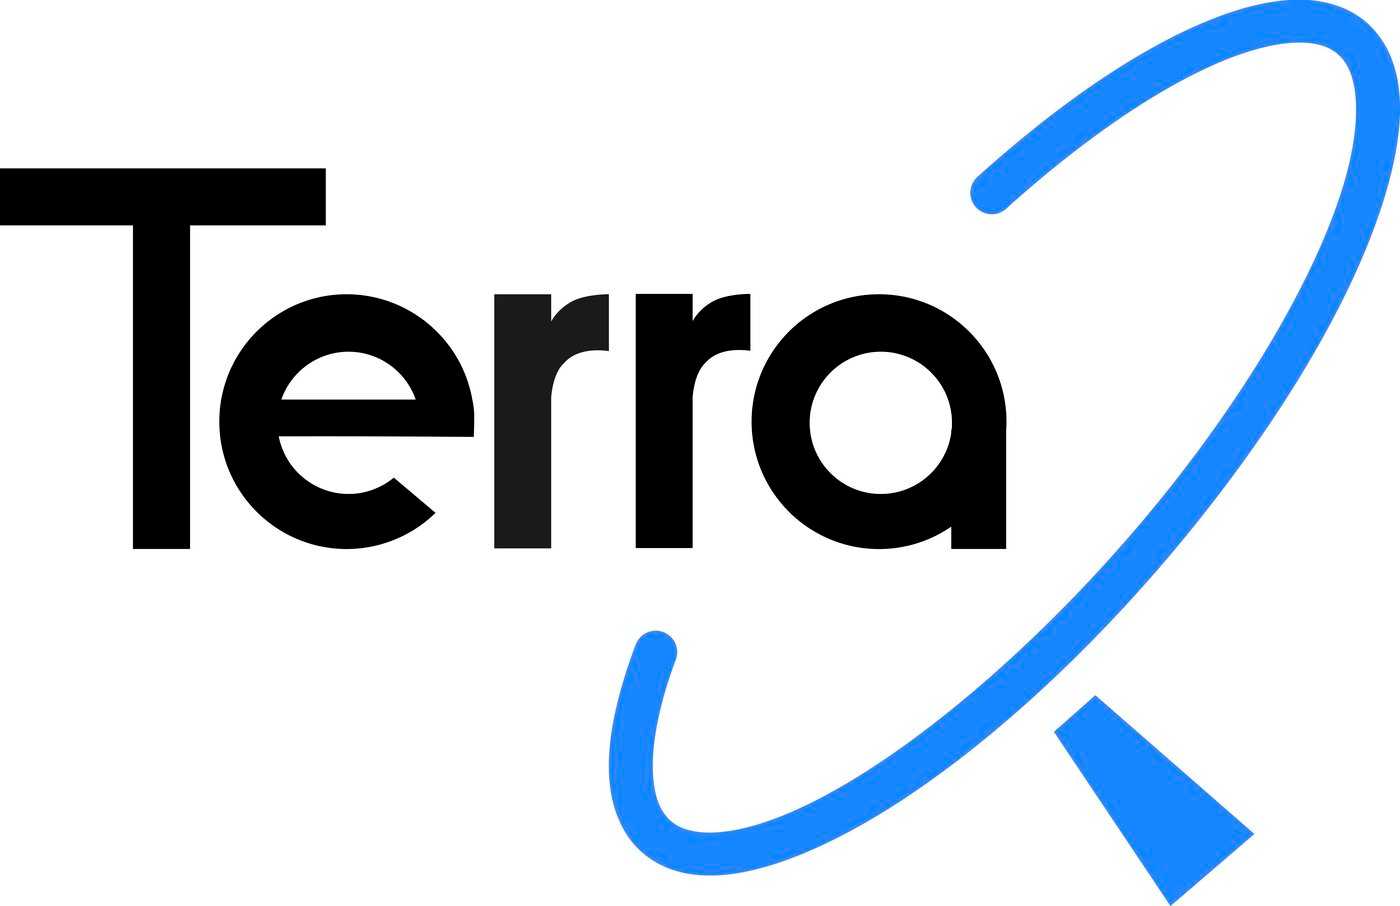 News-Image 46 of: German Research Foundation supports new collaborative research center TerraQ